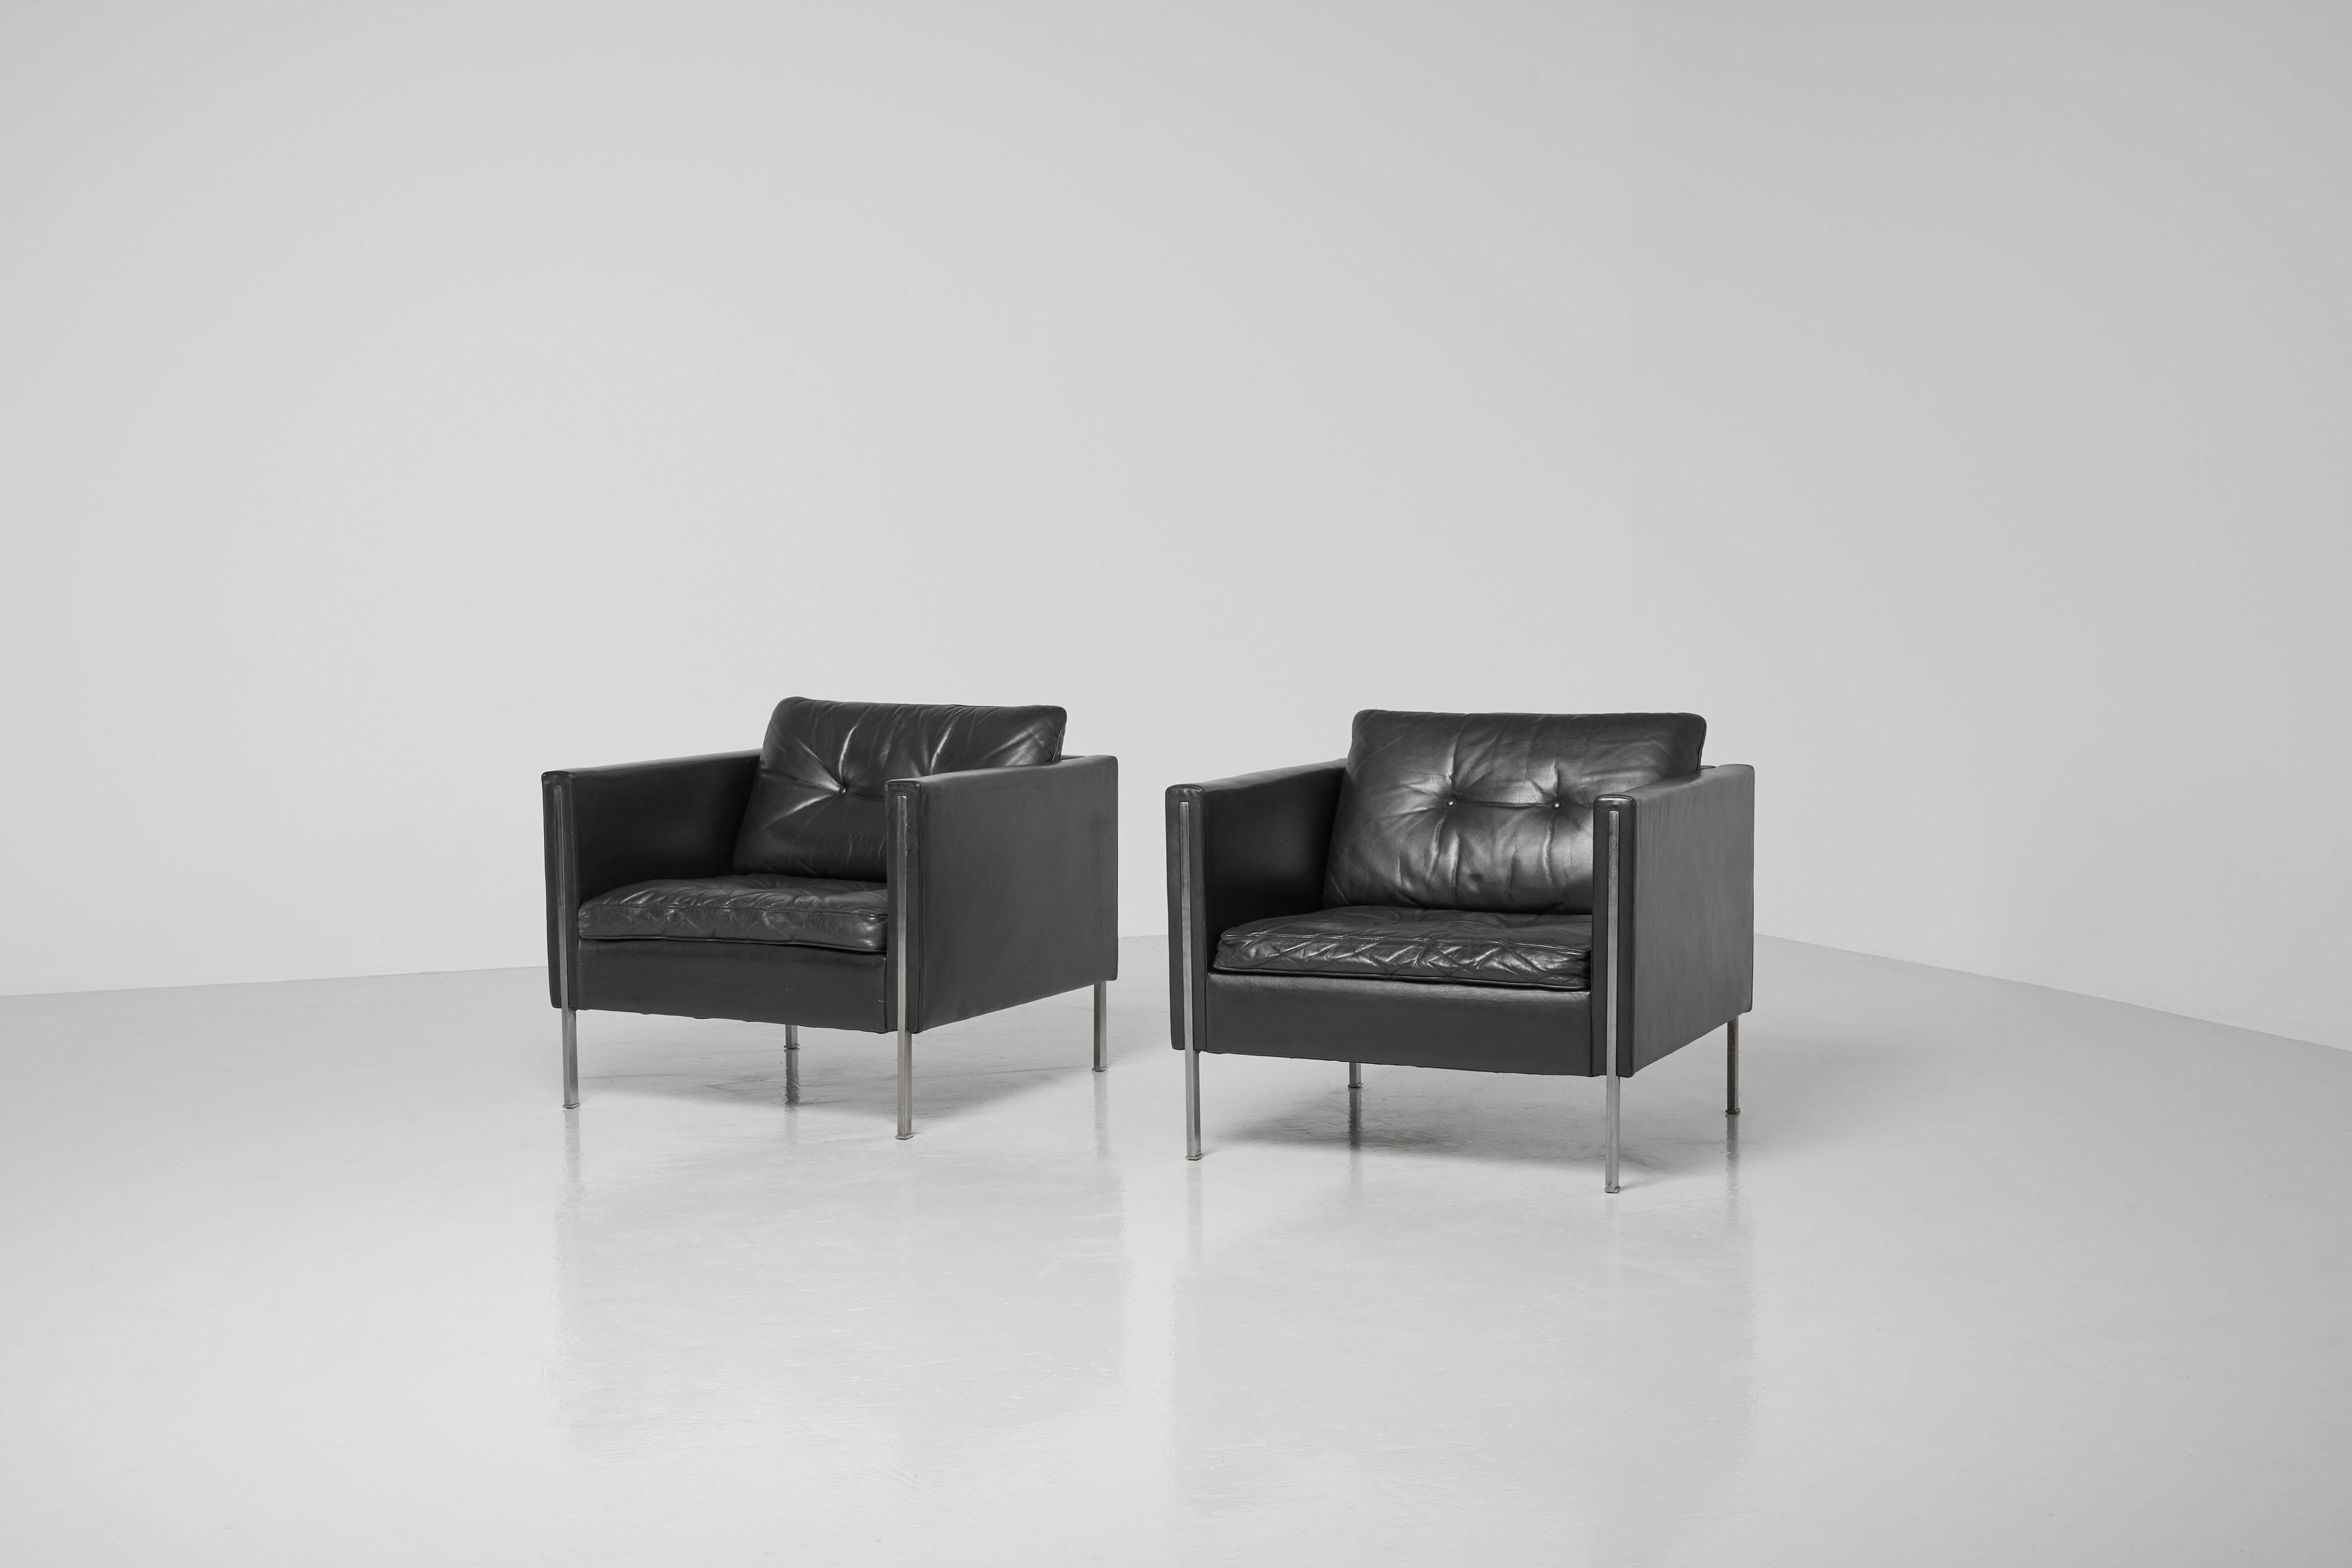 Nice minimalistic pair of model 442 lounge chairs designed by Pierre Paulin and manufactured by Artifort, The Netherlands 1962. This is for a pair of lounge chairs model 442 which is a set of chairs in quality black leather and matt chrome plated